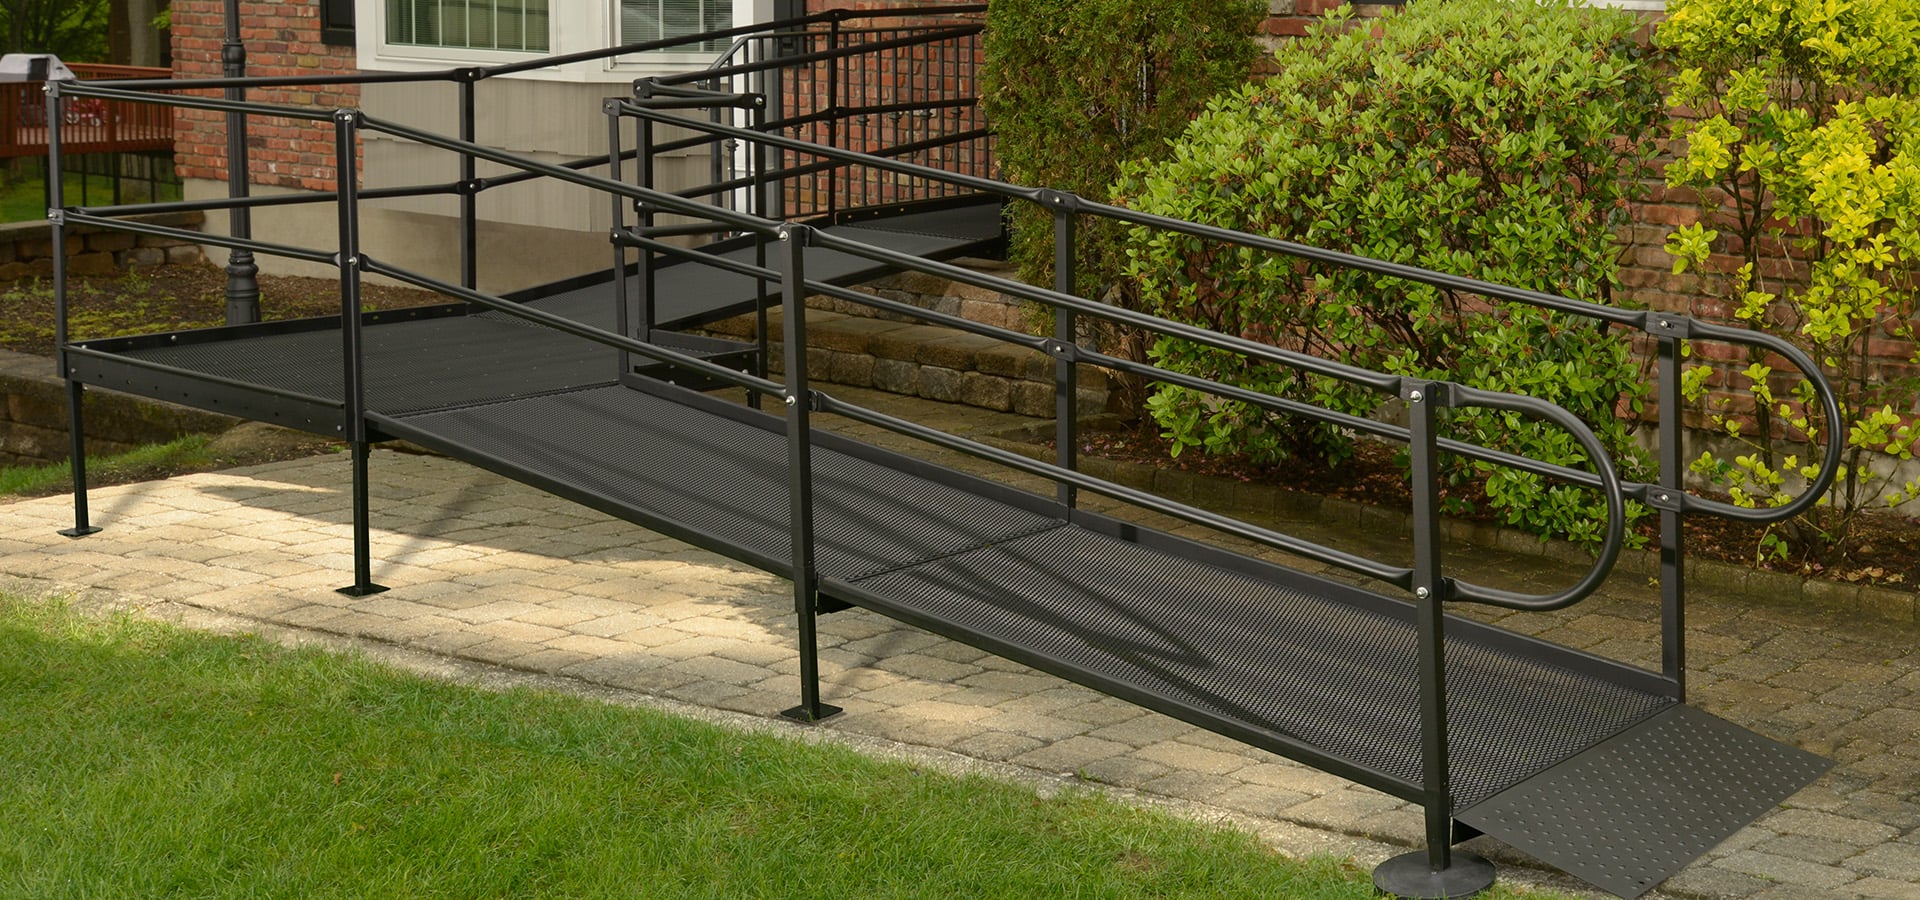 Steel Mesh Wheelchair Access Ramps Outside Someone's Home